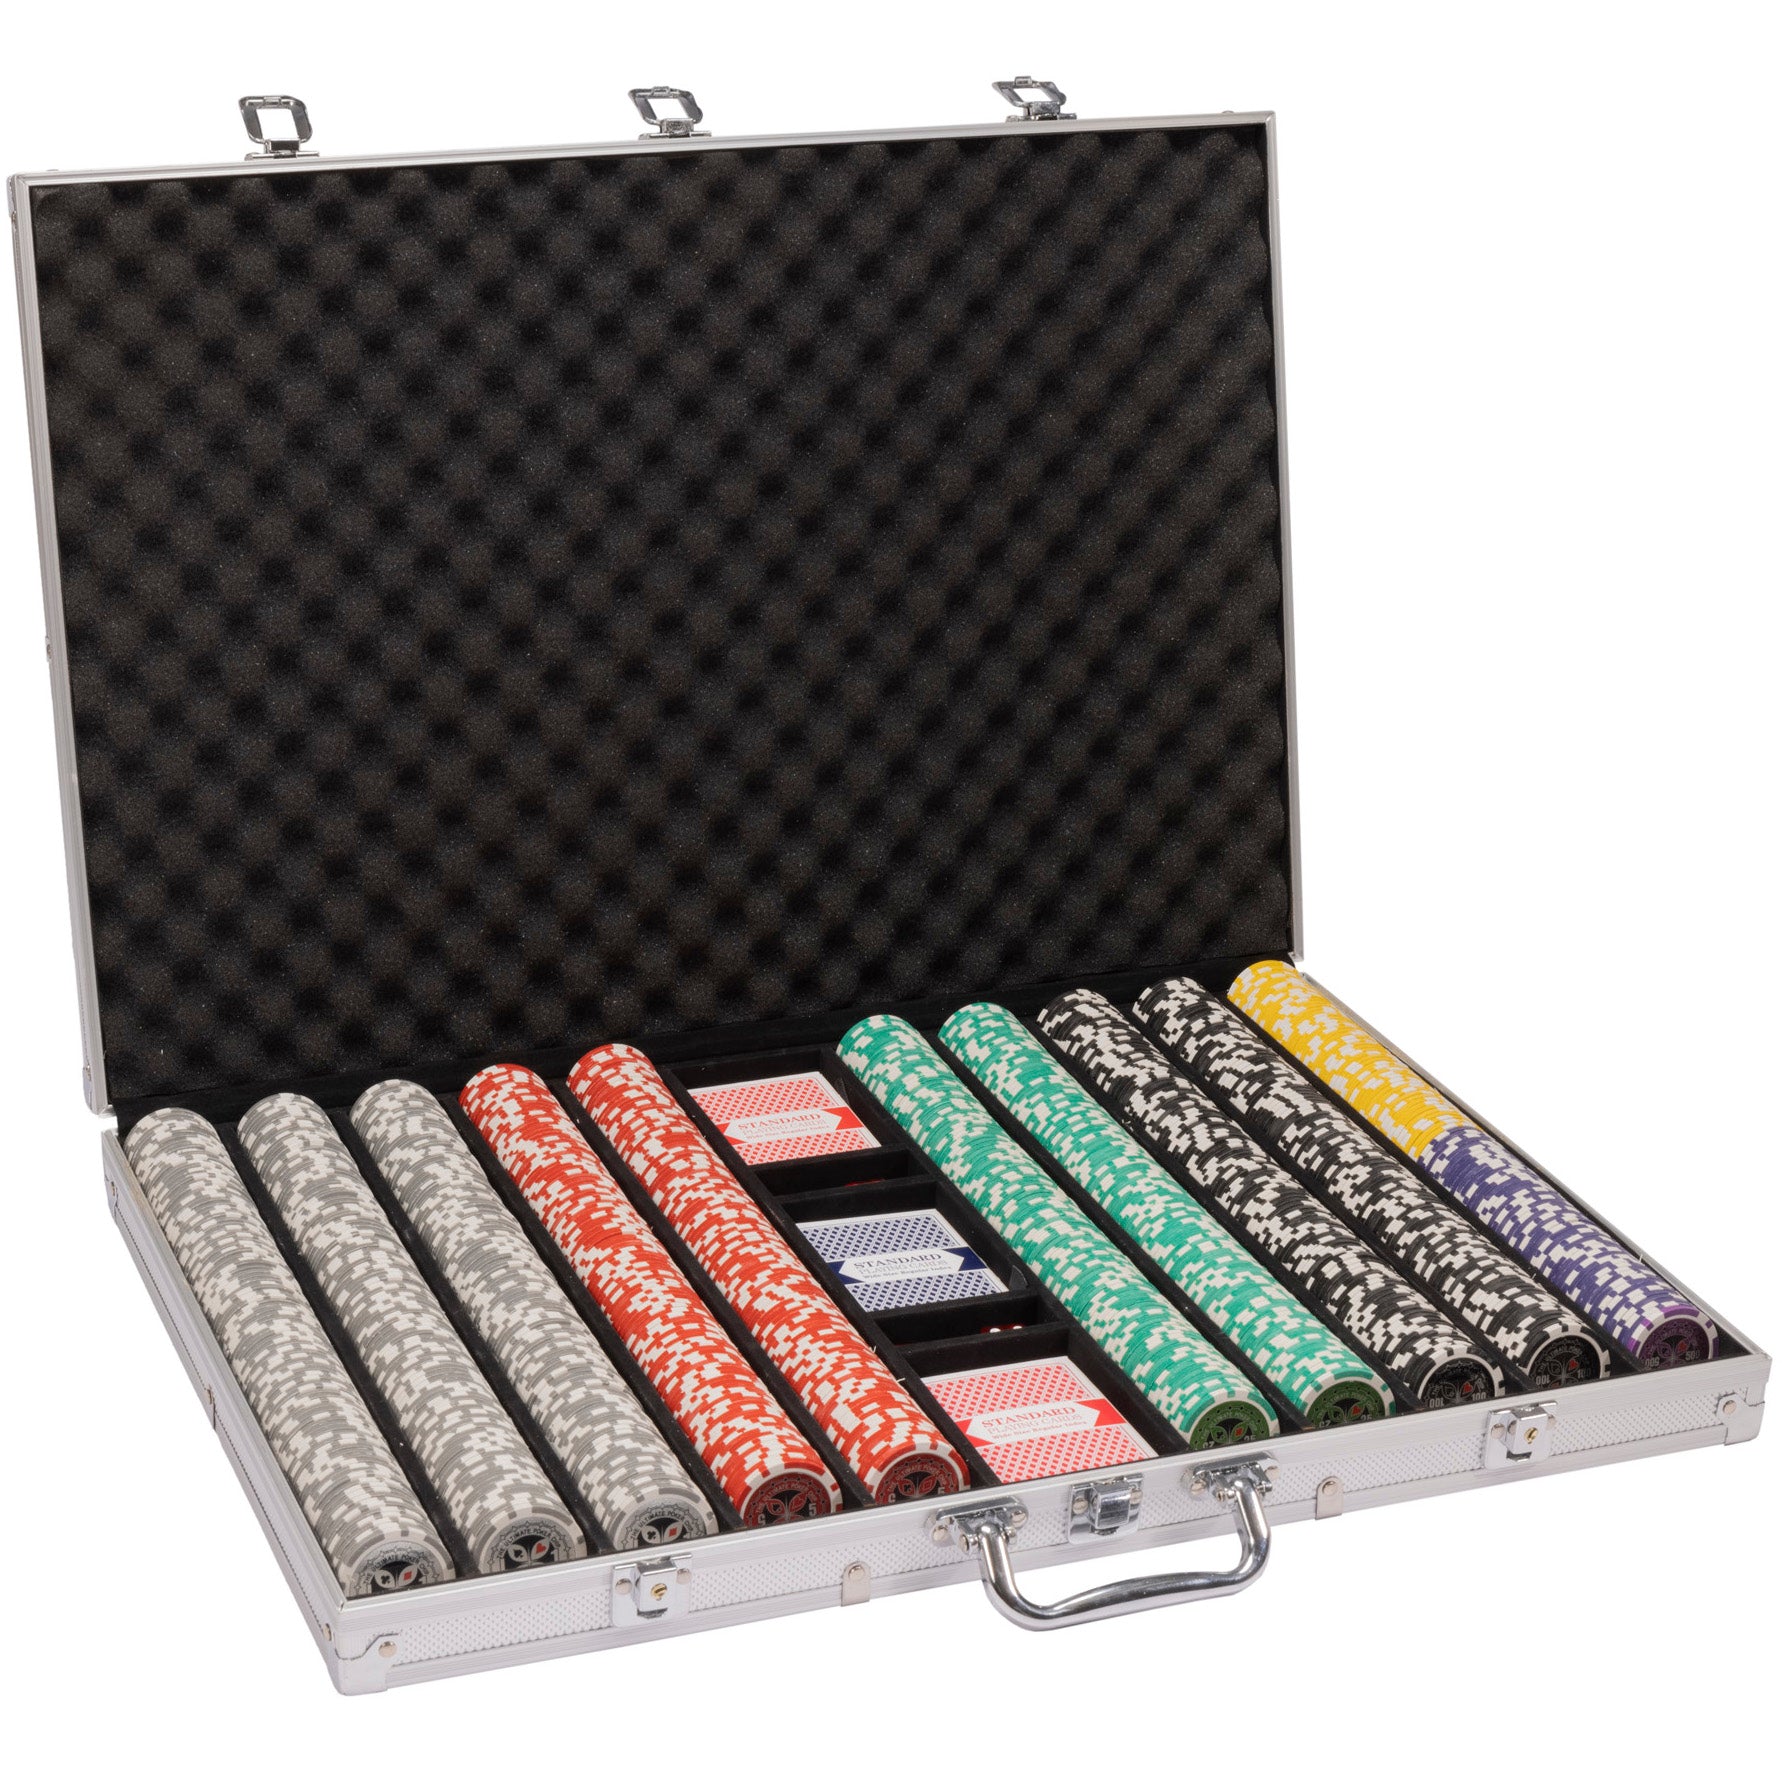 Ultimate 14-gram Holo Inlay Poker Chip Set in Aluminum Case (1000 Count) - Clay Composite